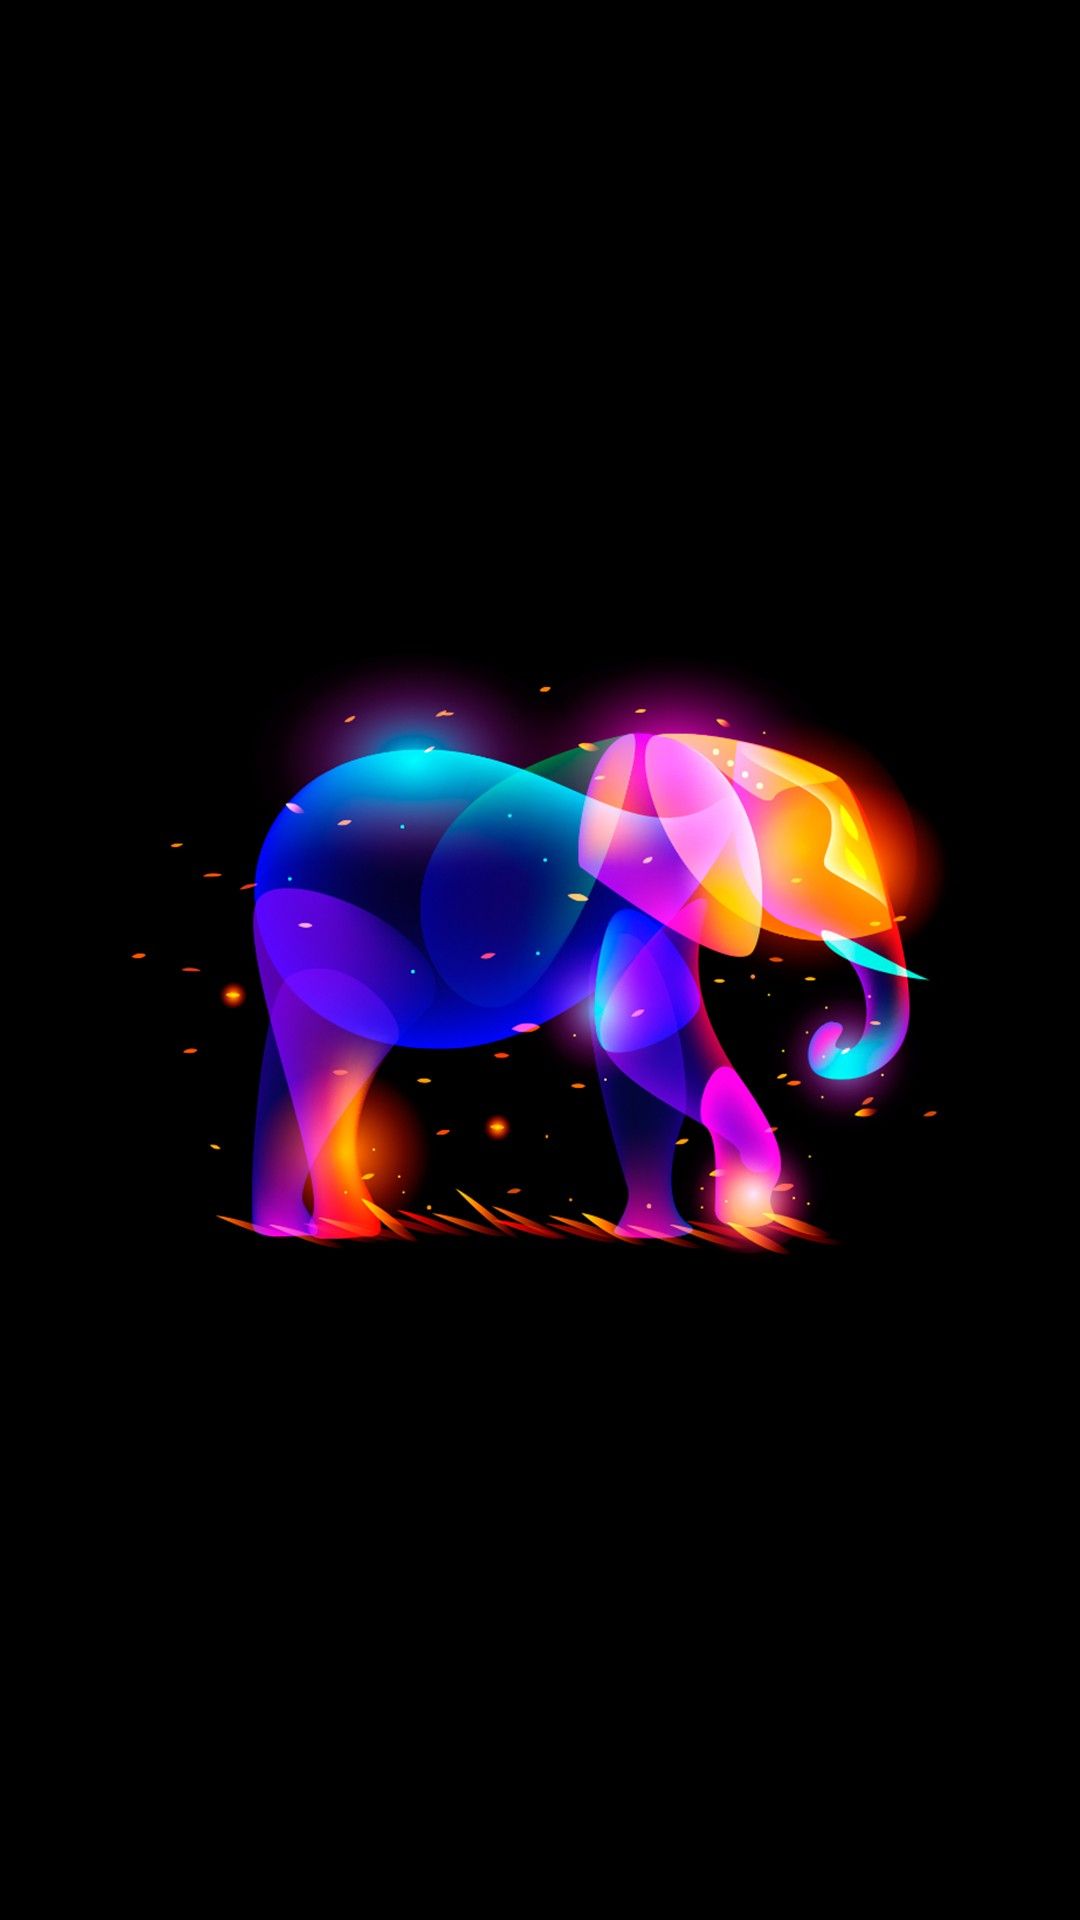 Cute Colorful Elephant Wallpapers